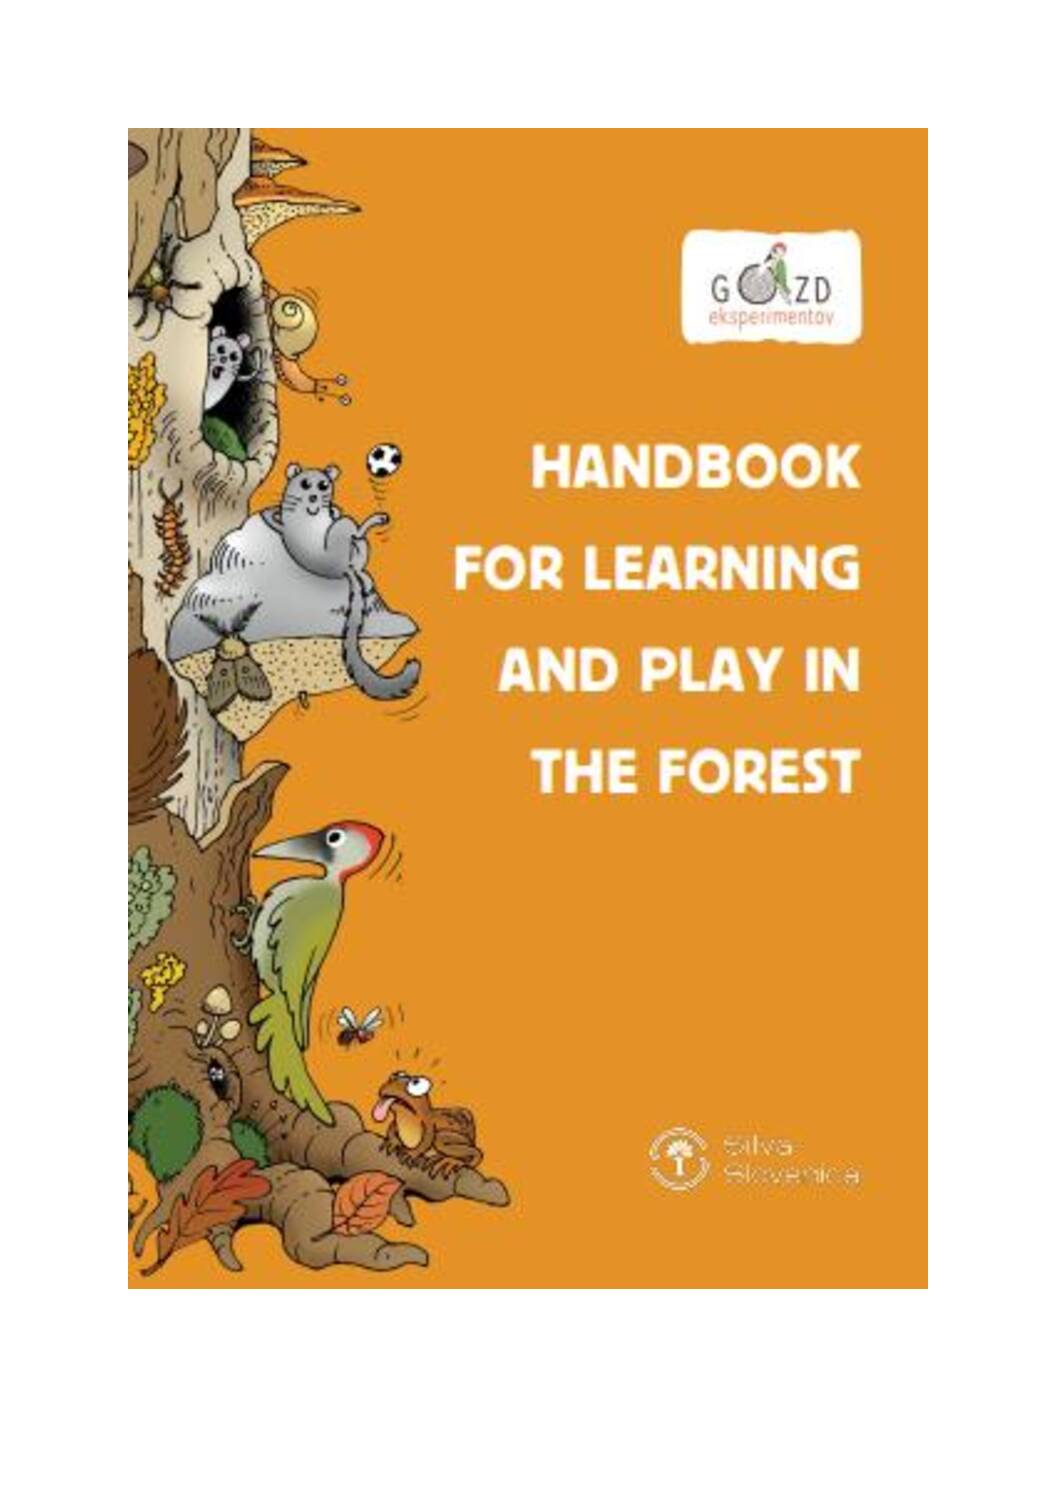 Handbook for Learning and Play in the Forest